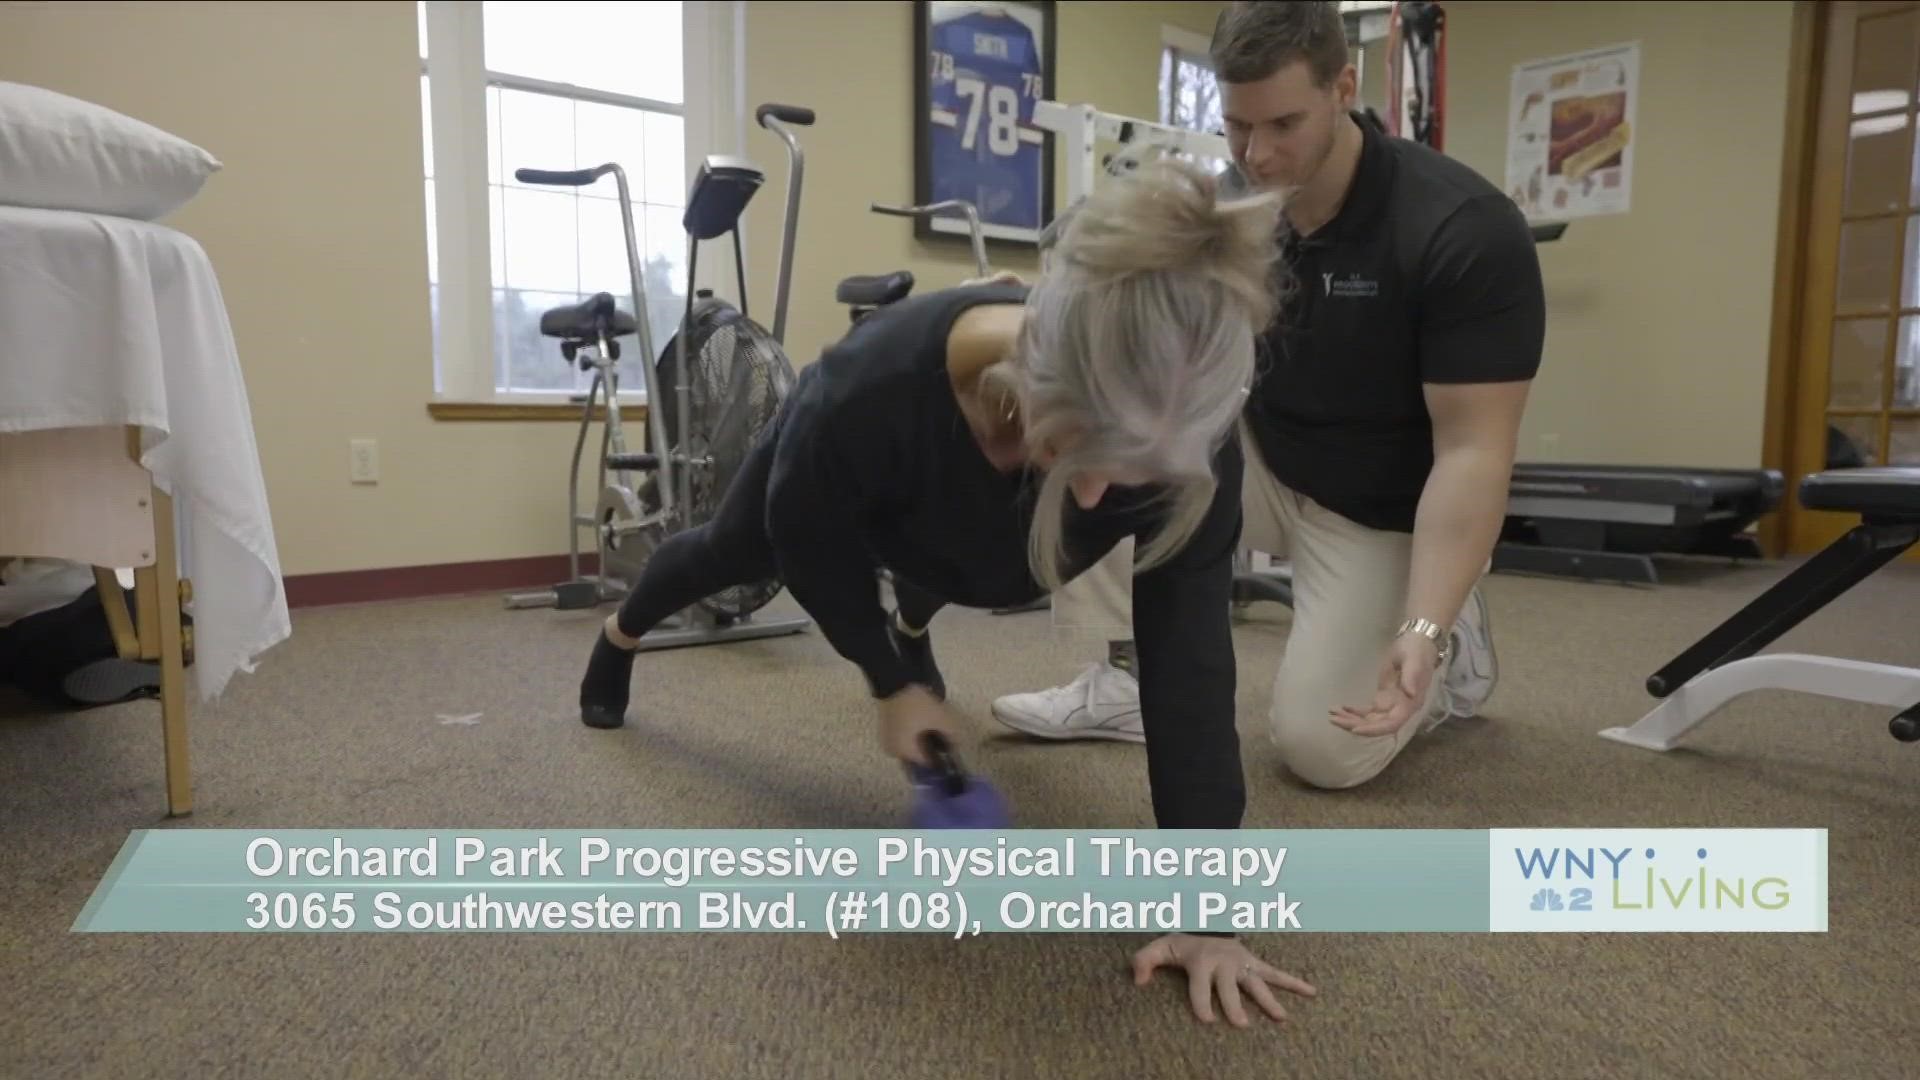 WNY Living- March 4th - Orchard Park Progressive Physical Therapy - THIS VIDEO IS SPONSORED BY ORCHARD PARK PROGRESSIVE PHYSICAL THERAPY